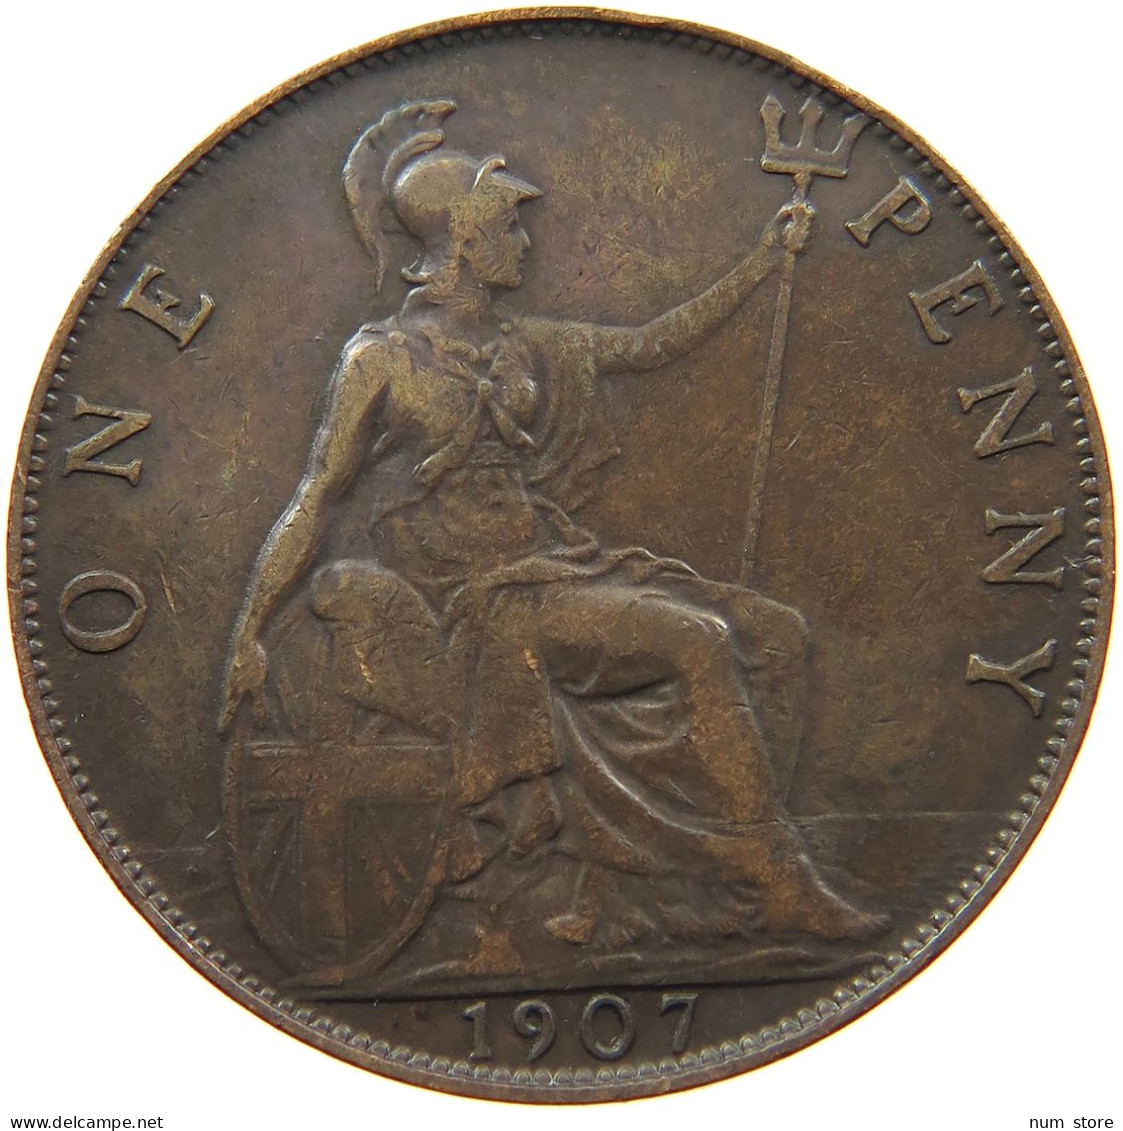 GREAT BRITAIN PENNY 1907 EDWARD VII., 1901 - 1910 #MA 101838 - D. 1 Penny